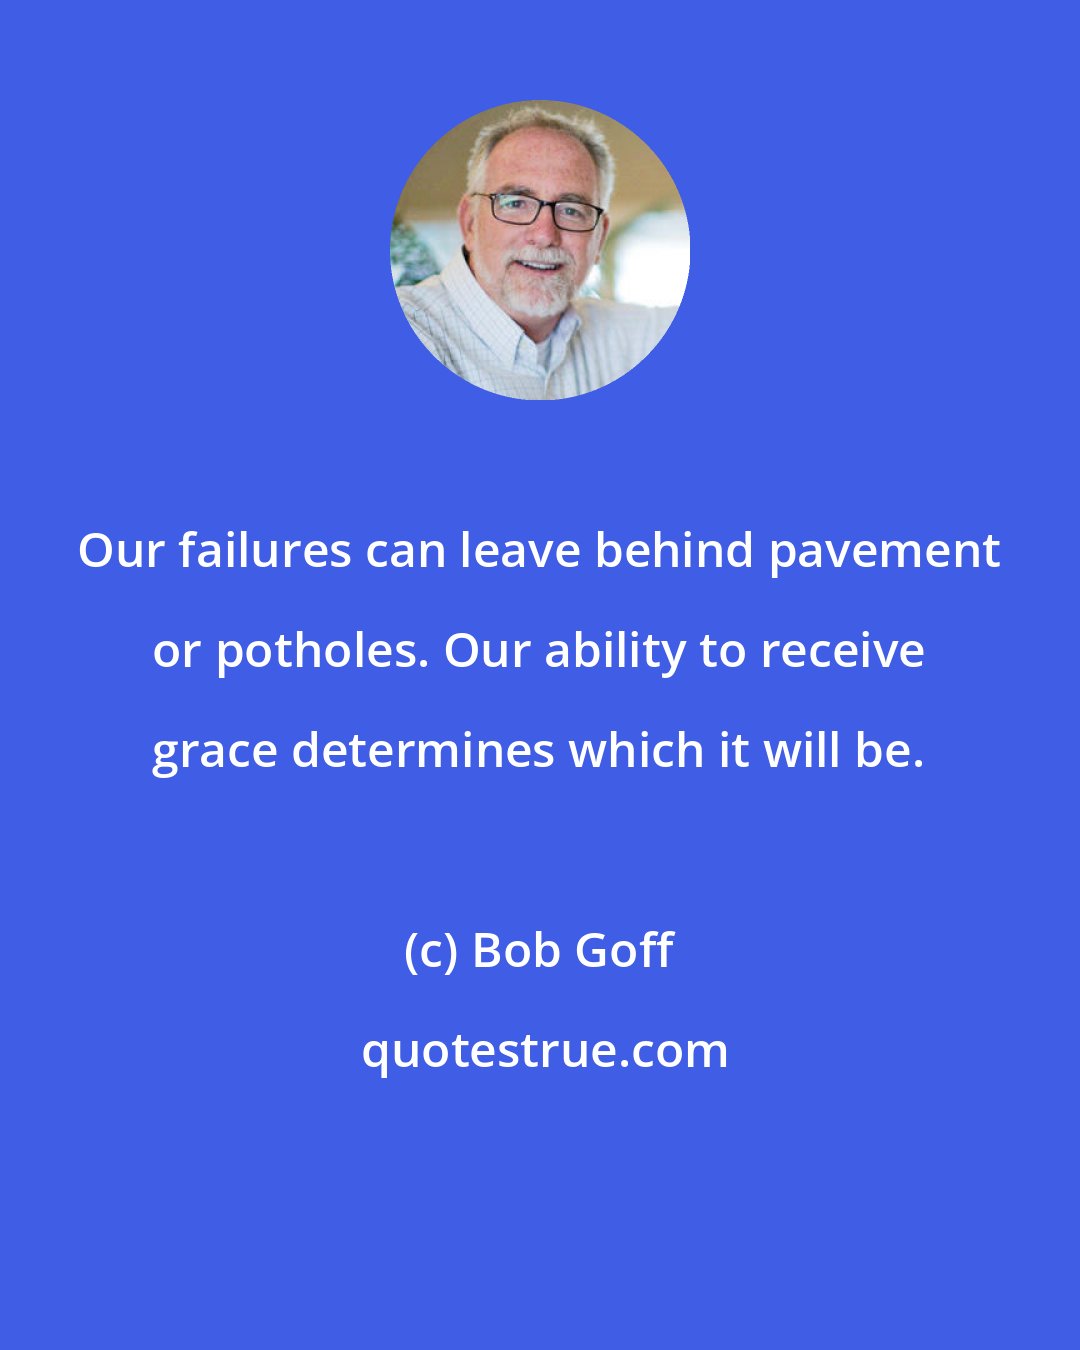 Bob Goff: Our failures can leave behind pavement or potholes. Our ability to receive grace determines which it will be.